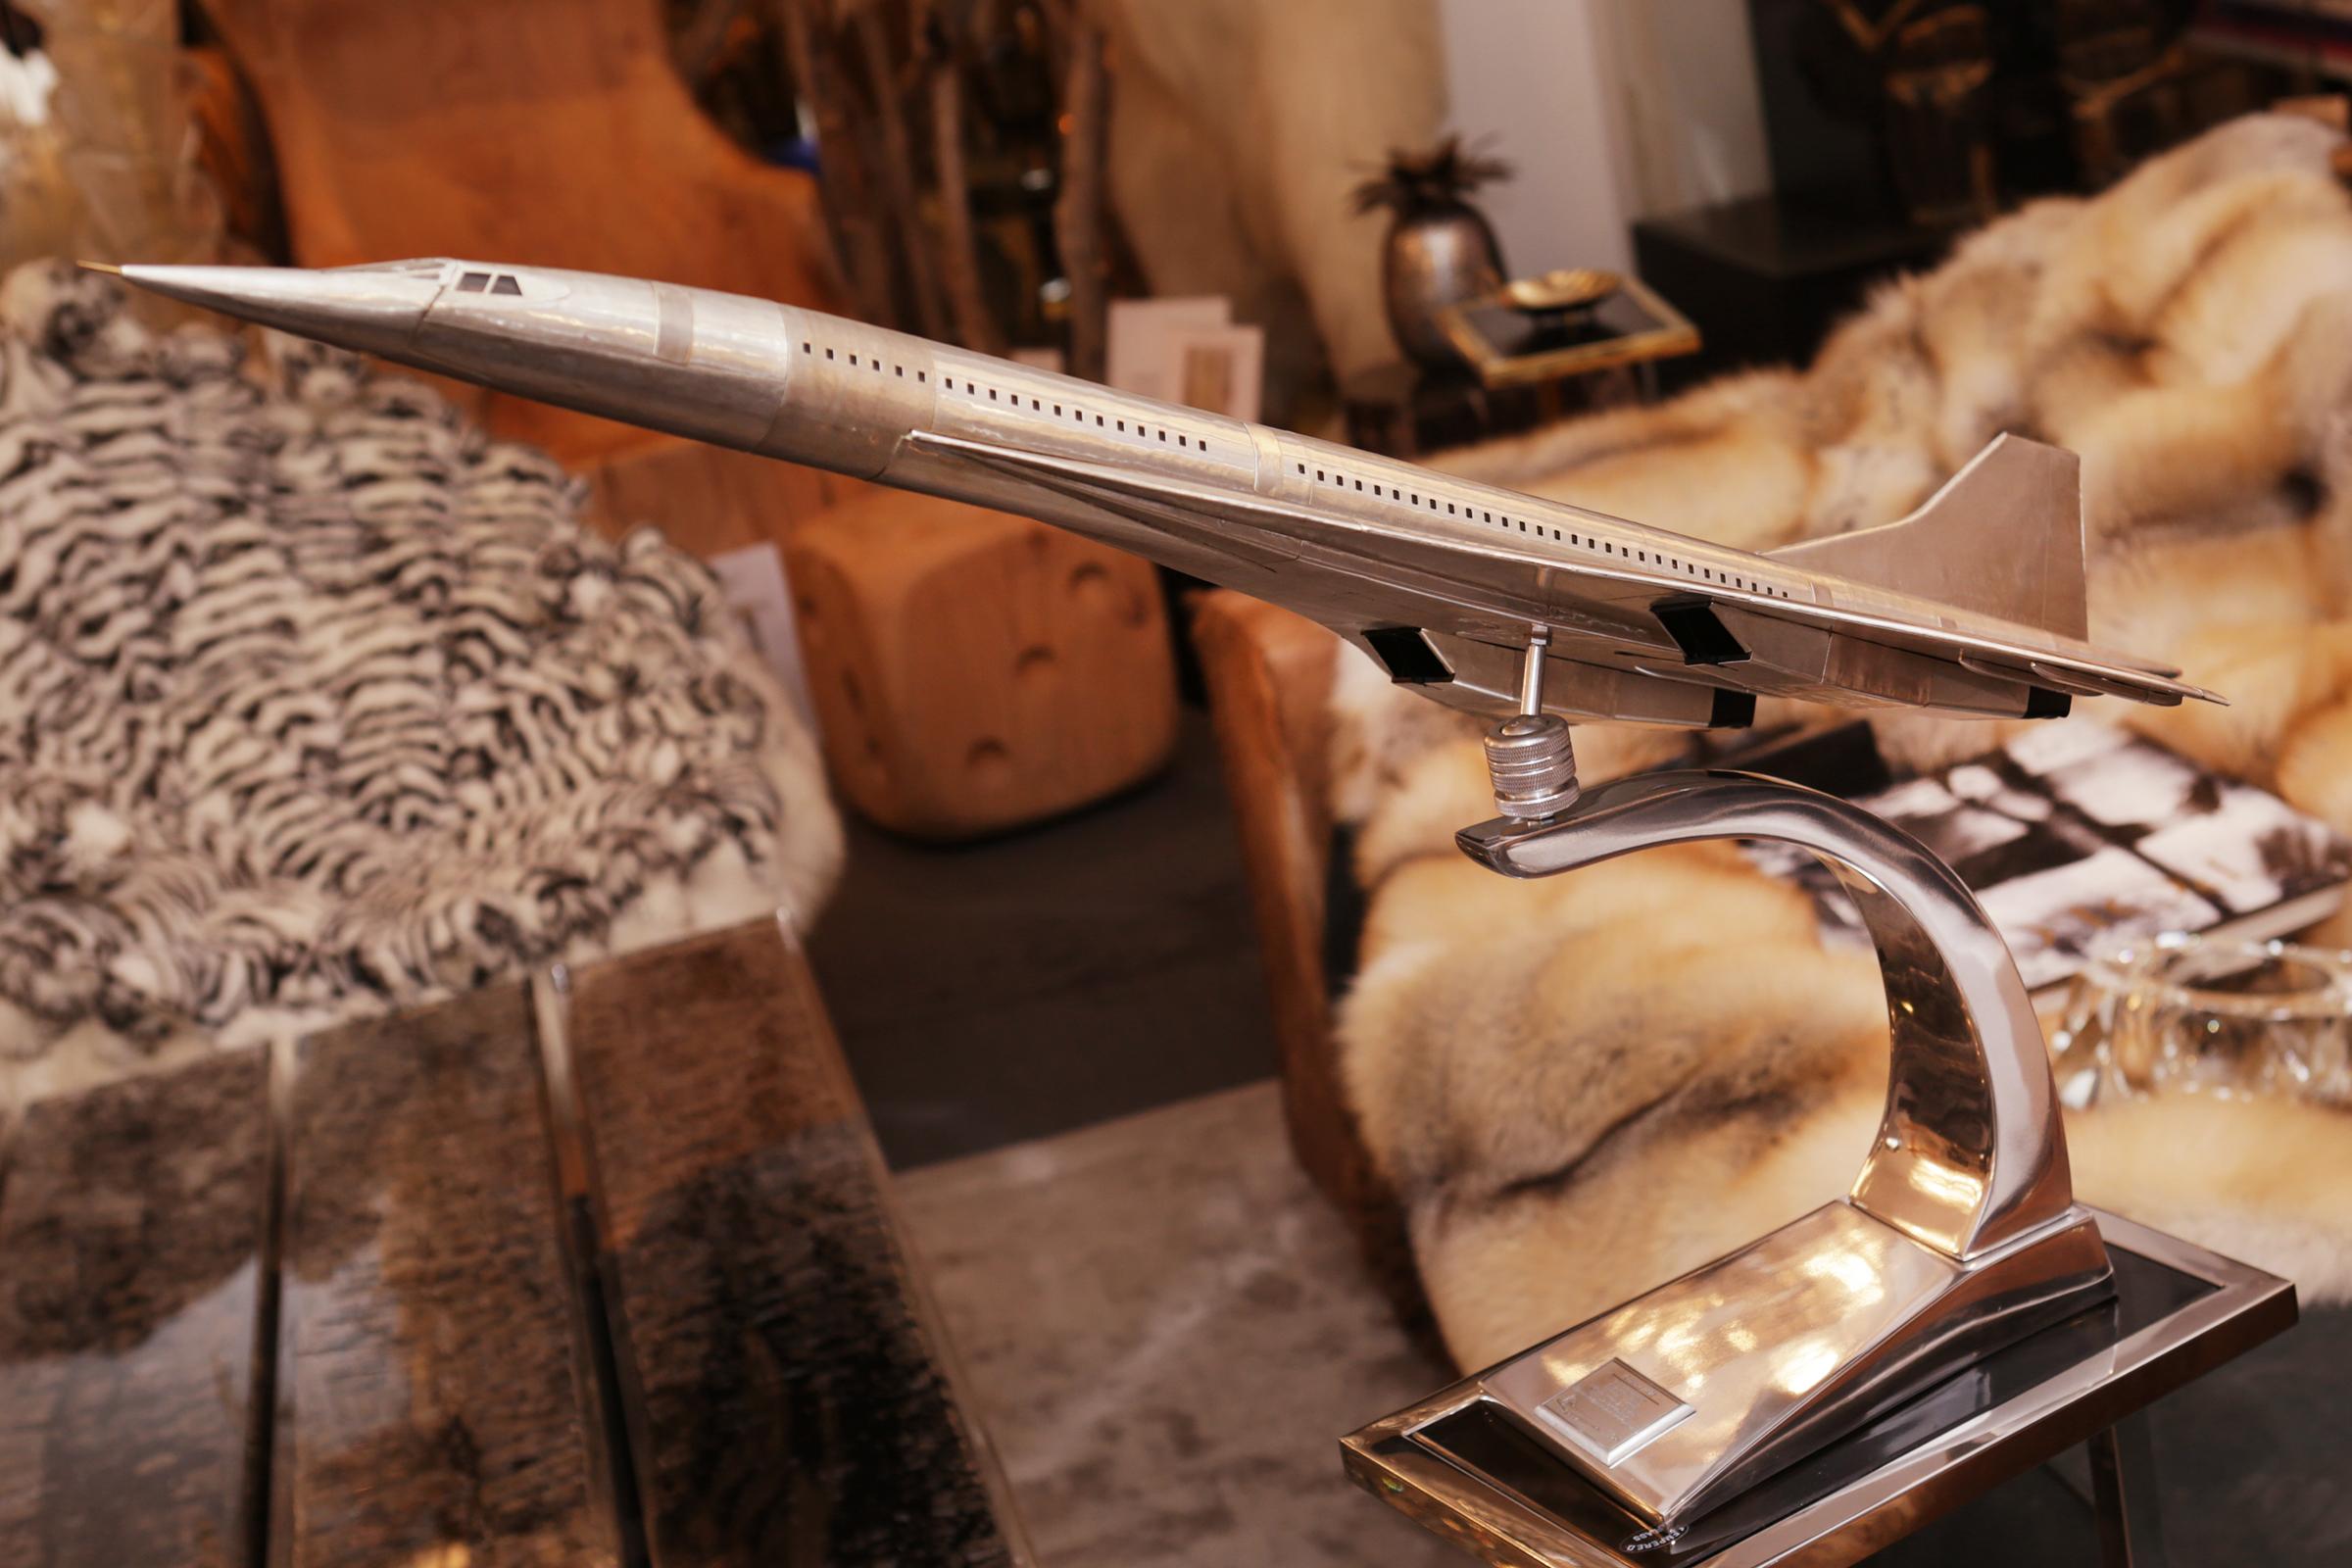 Hand-Crafted Concorde Supersonic Model For Sale